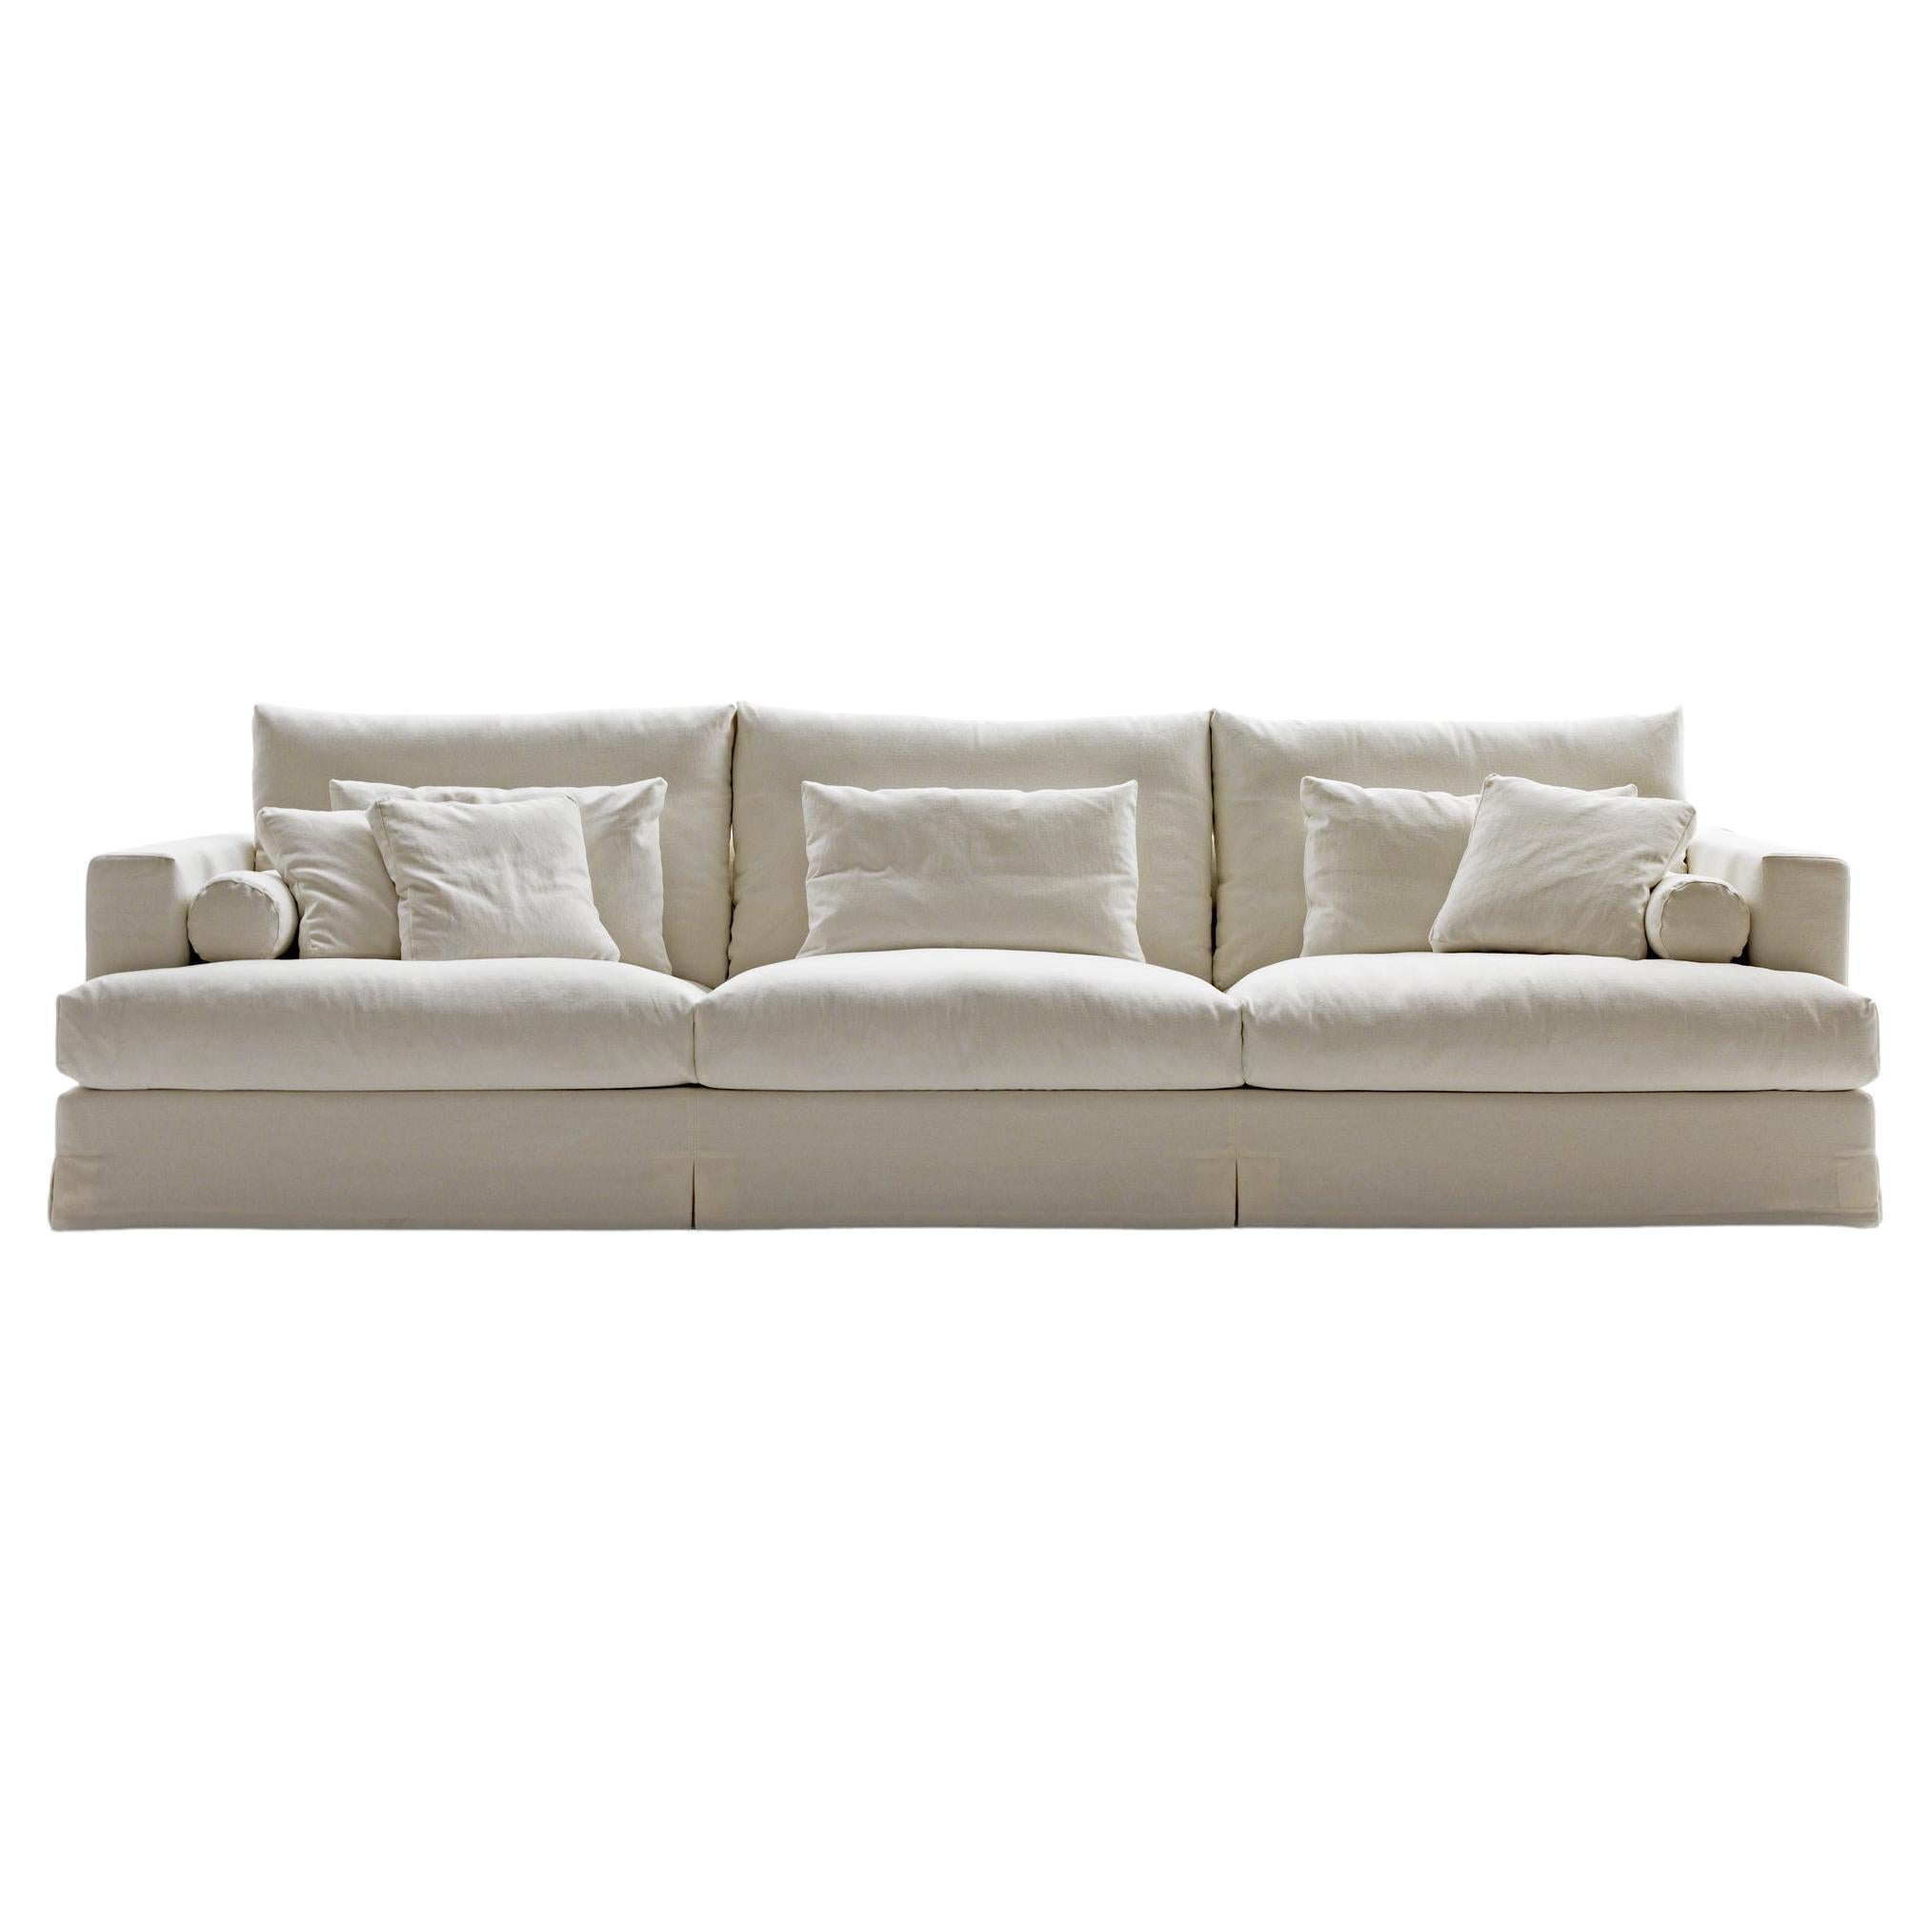 Karma Large Sofa in Byblos White Upholstery by Sergio Bicego